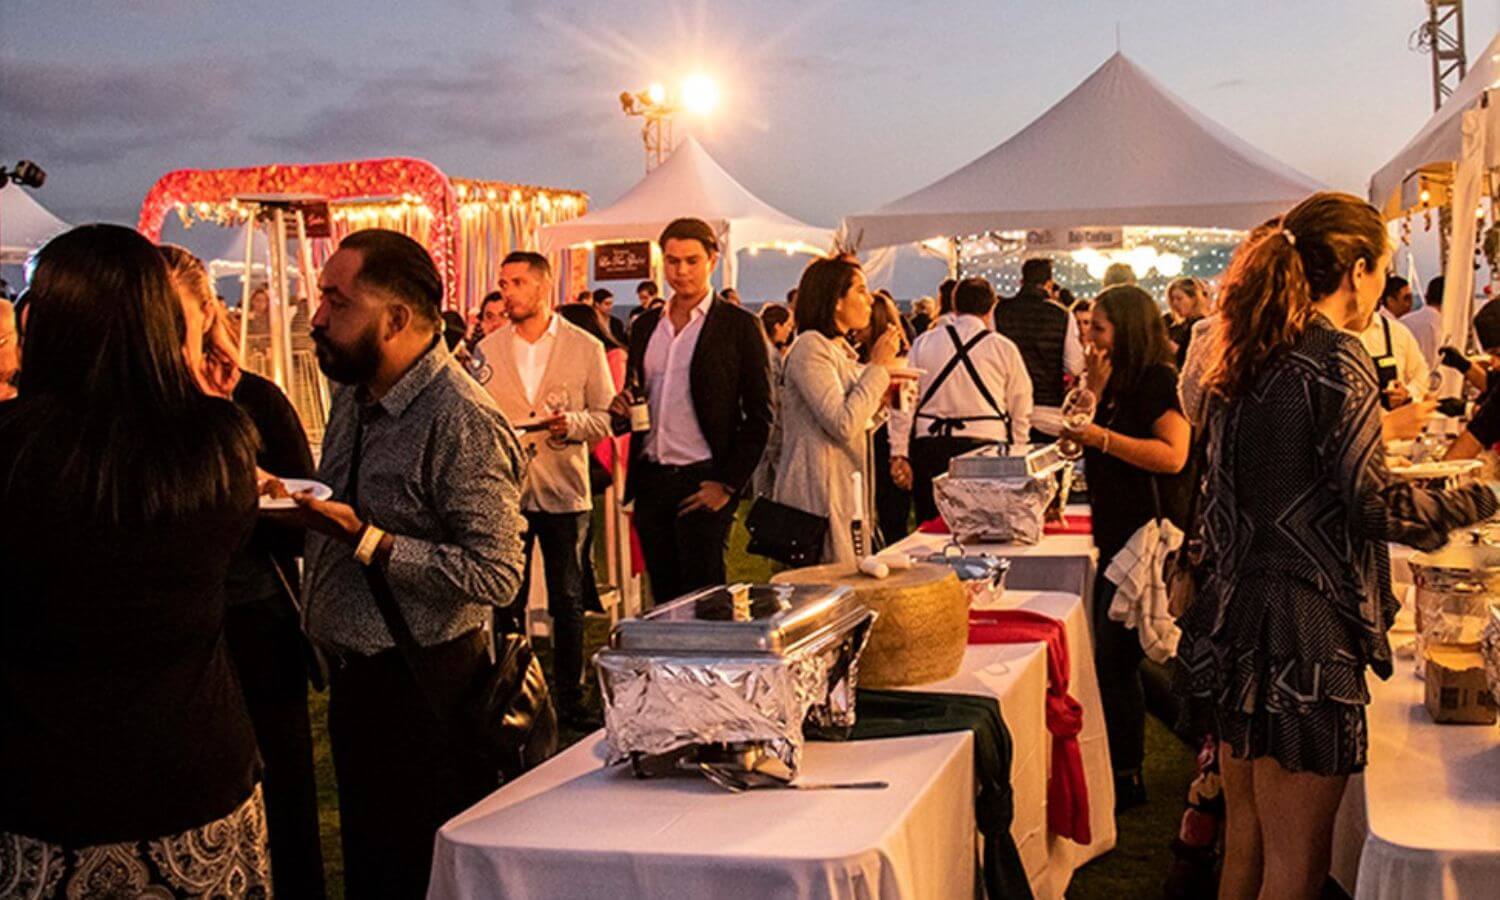 People mingling and sampling food in the evening at the Sabor a Cabo Culinary Festival